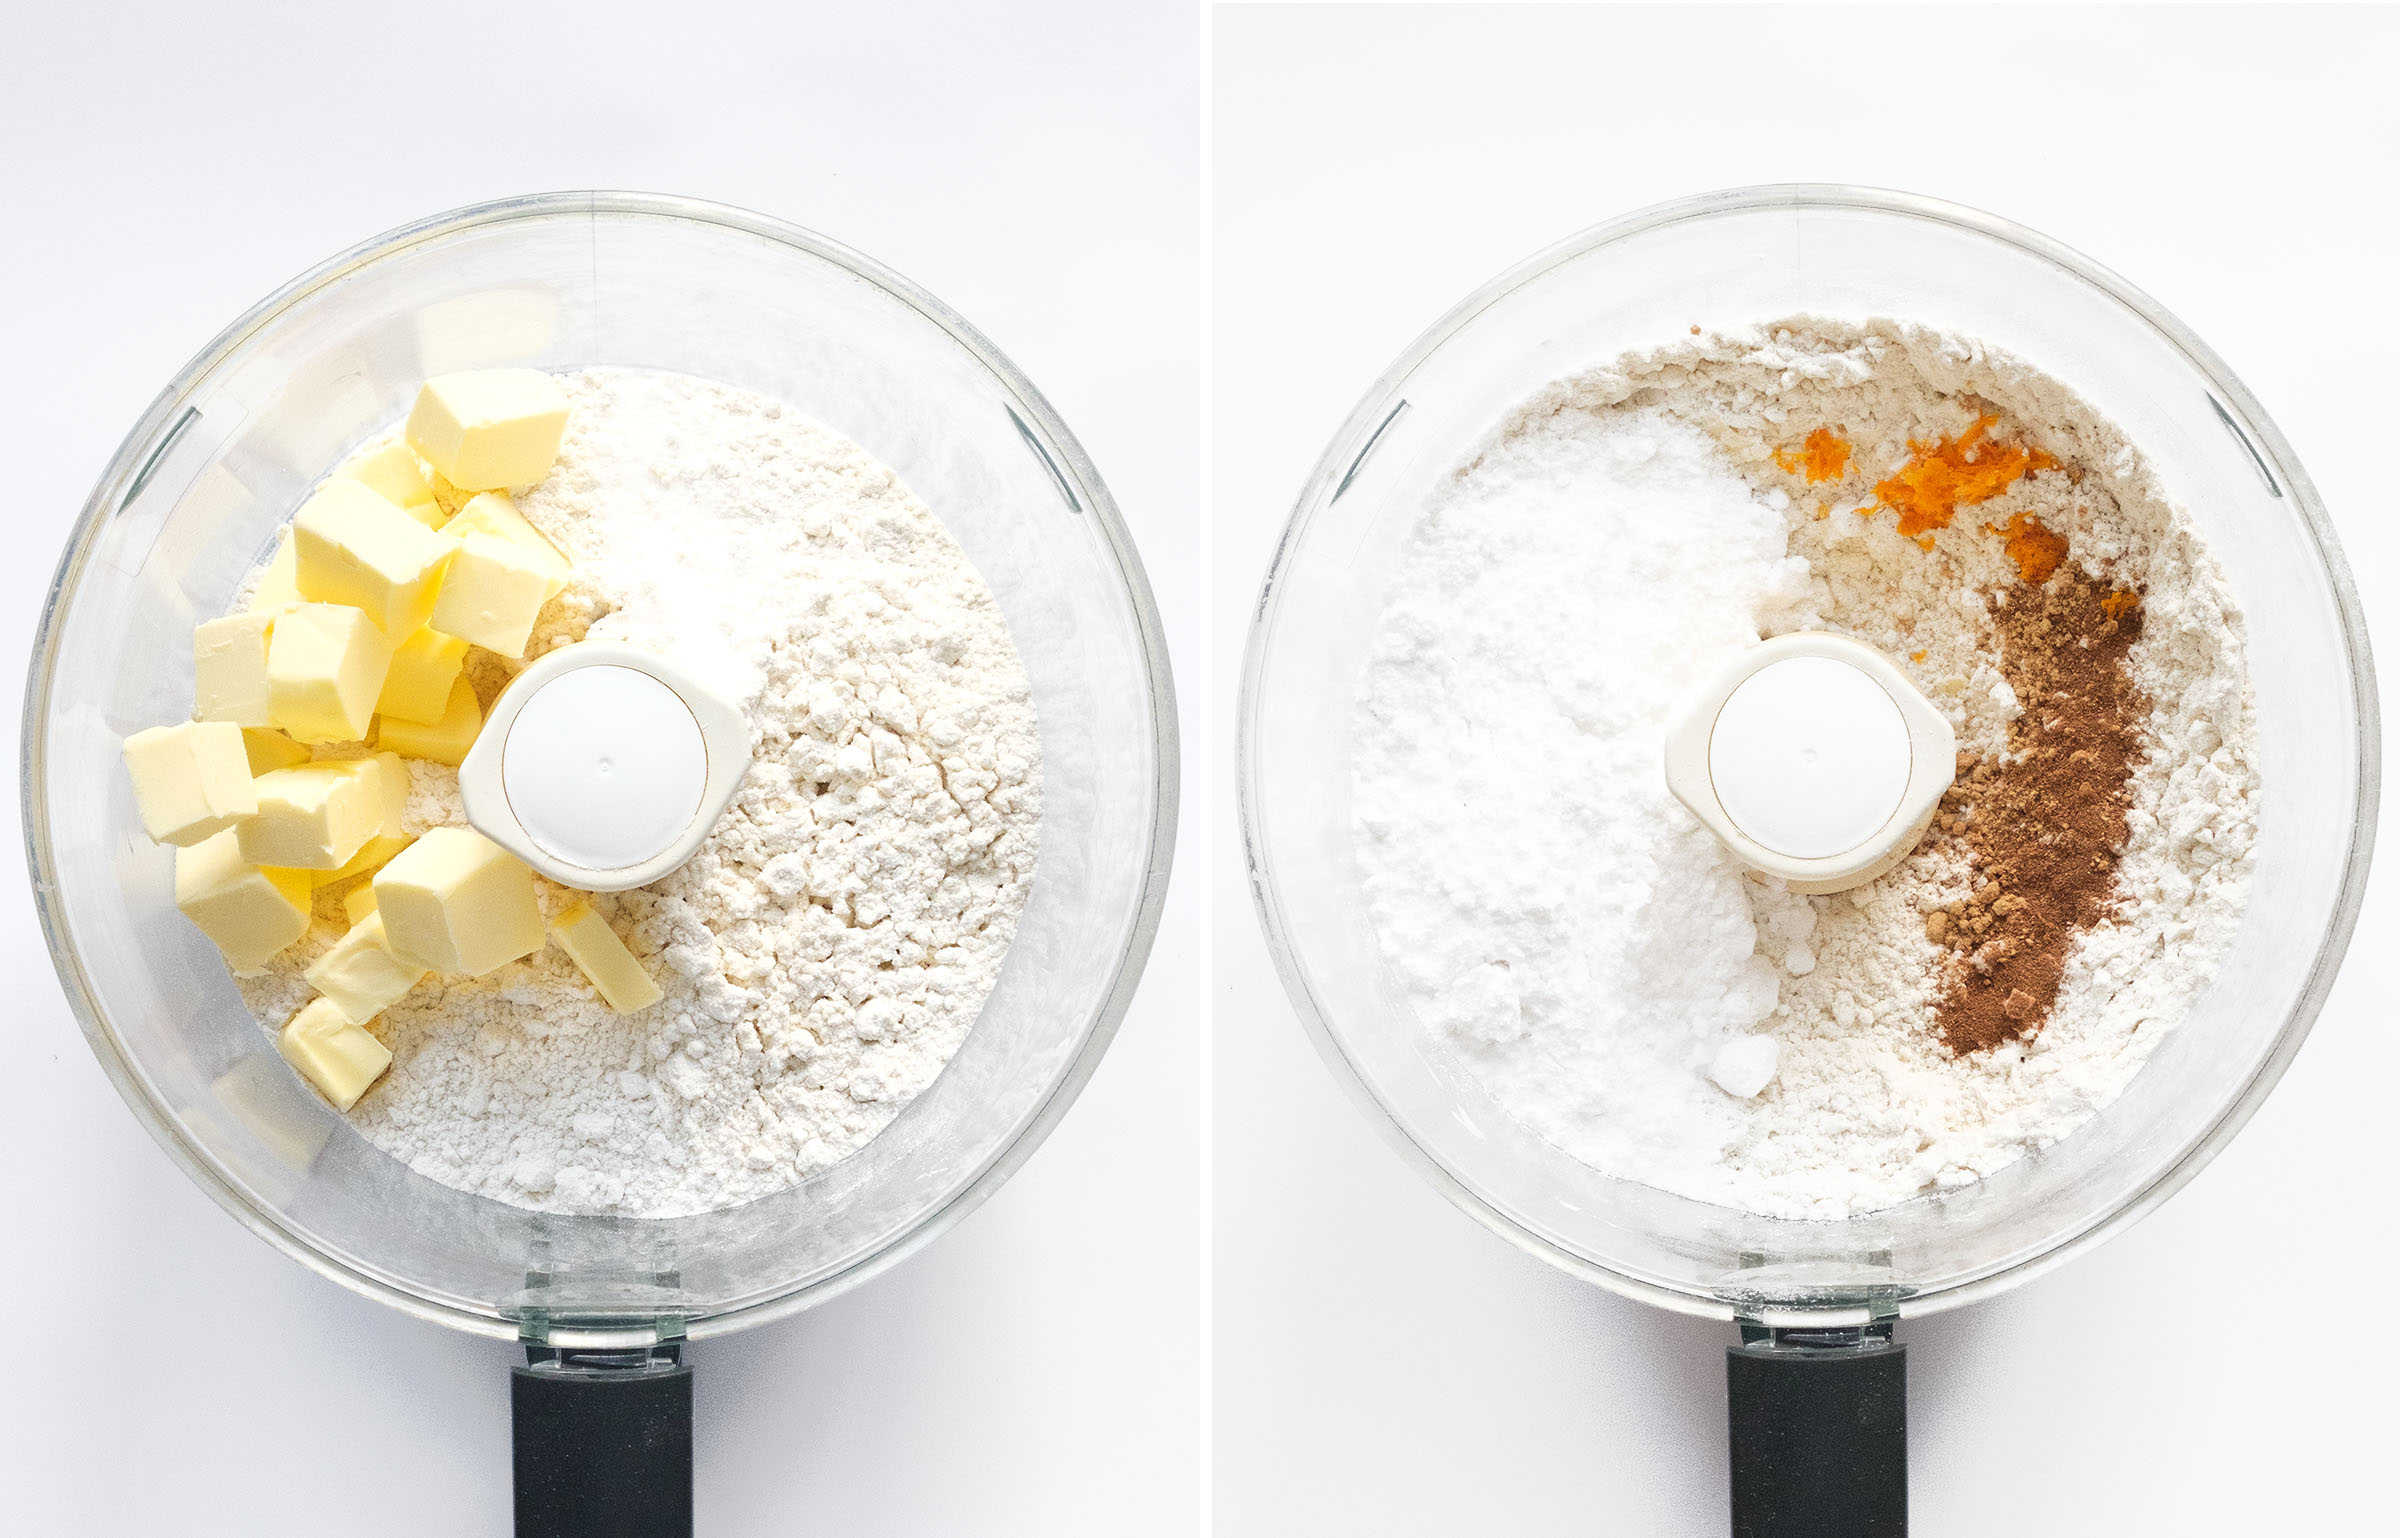 Top view of a food processor showing how to mix butter, sugar and flour.